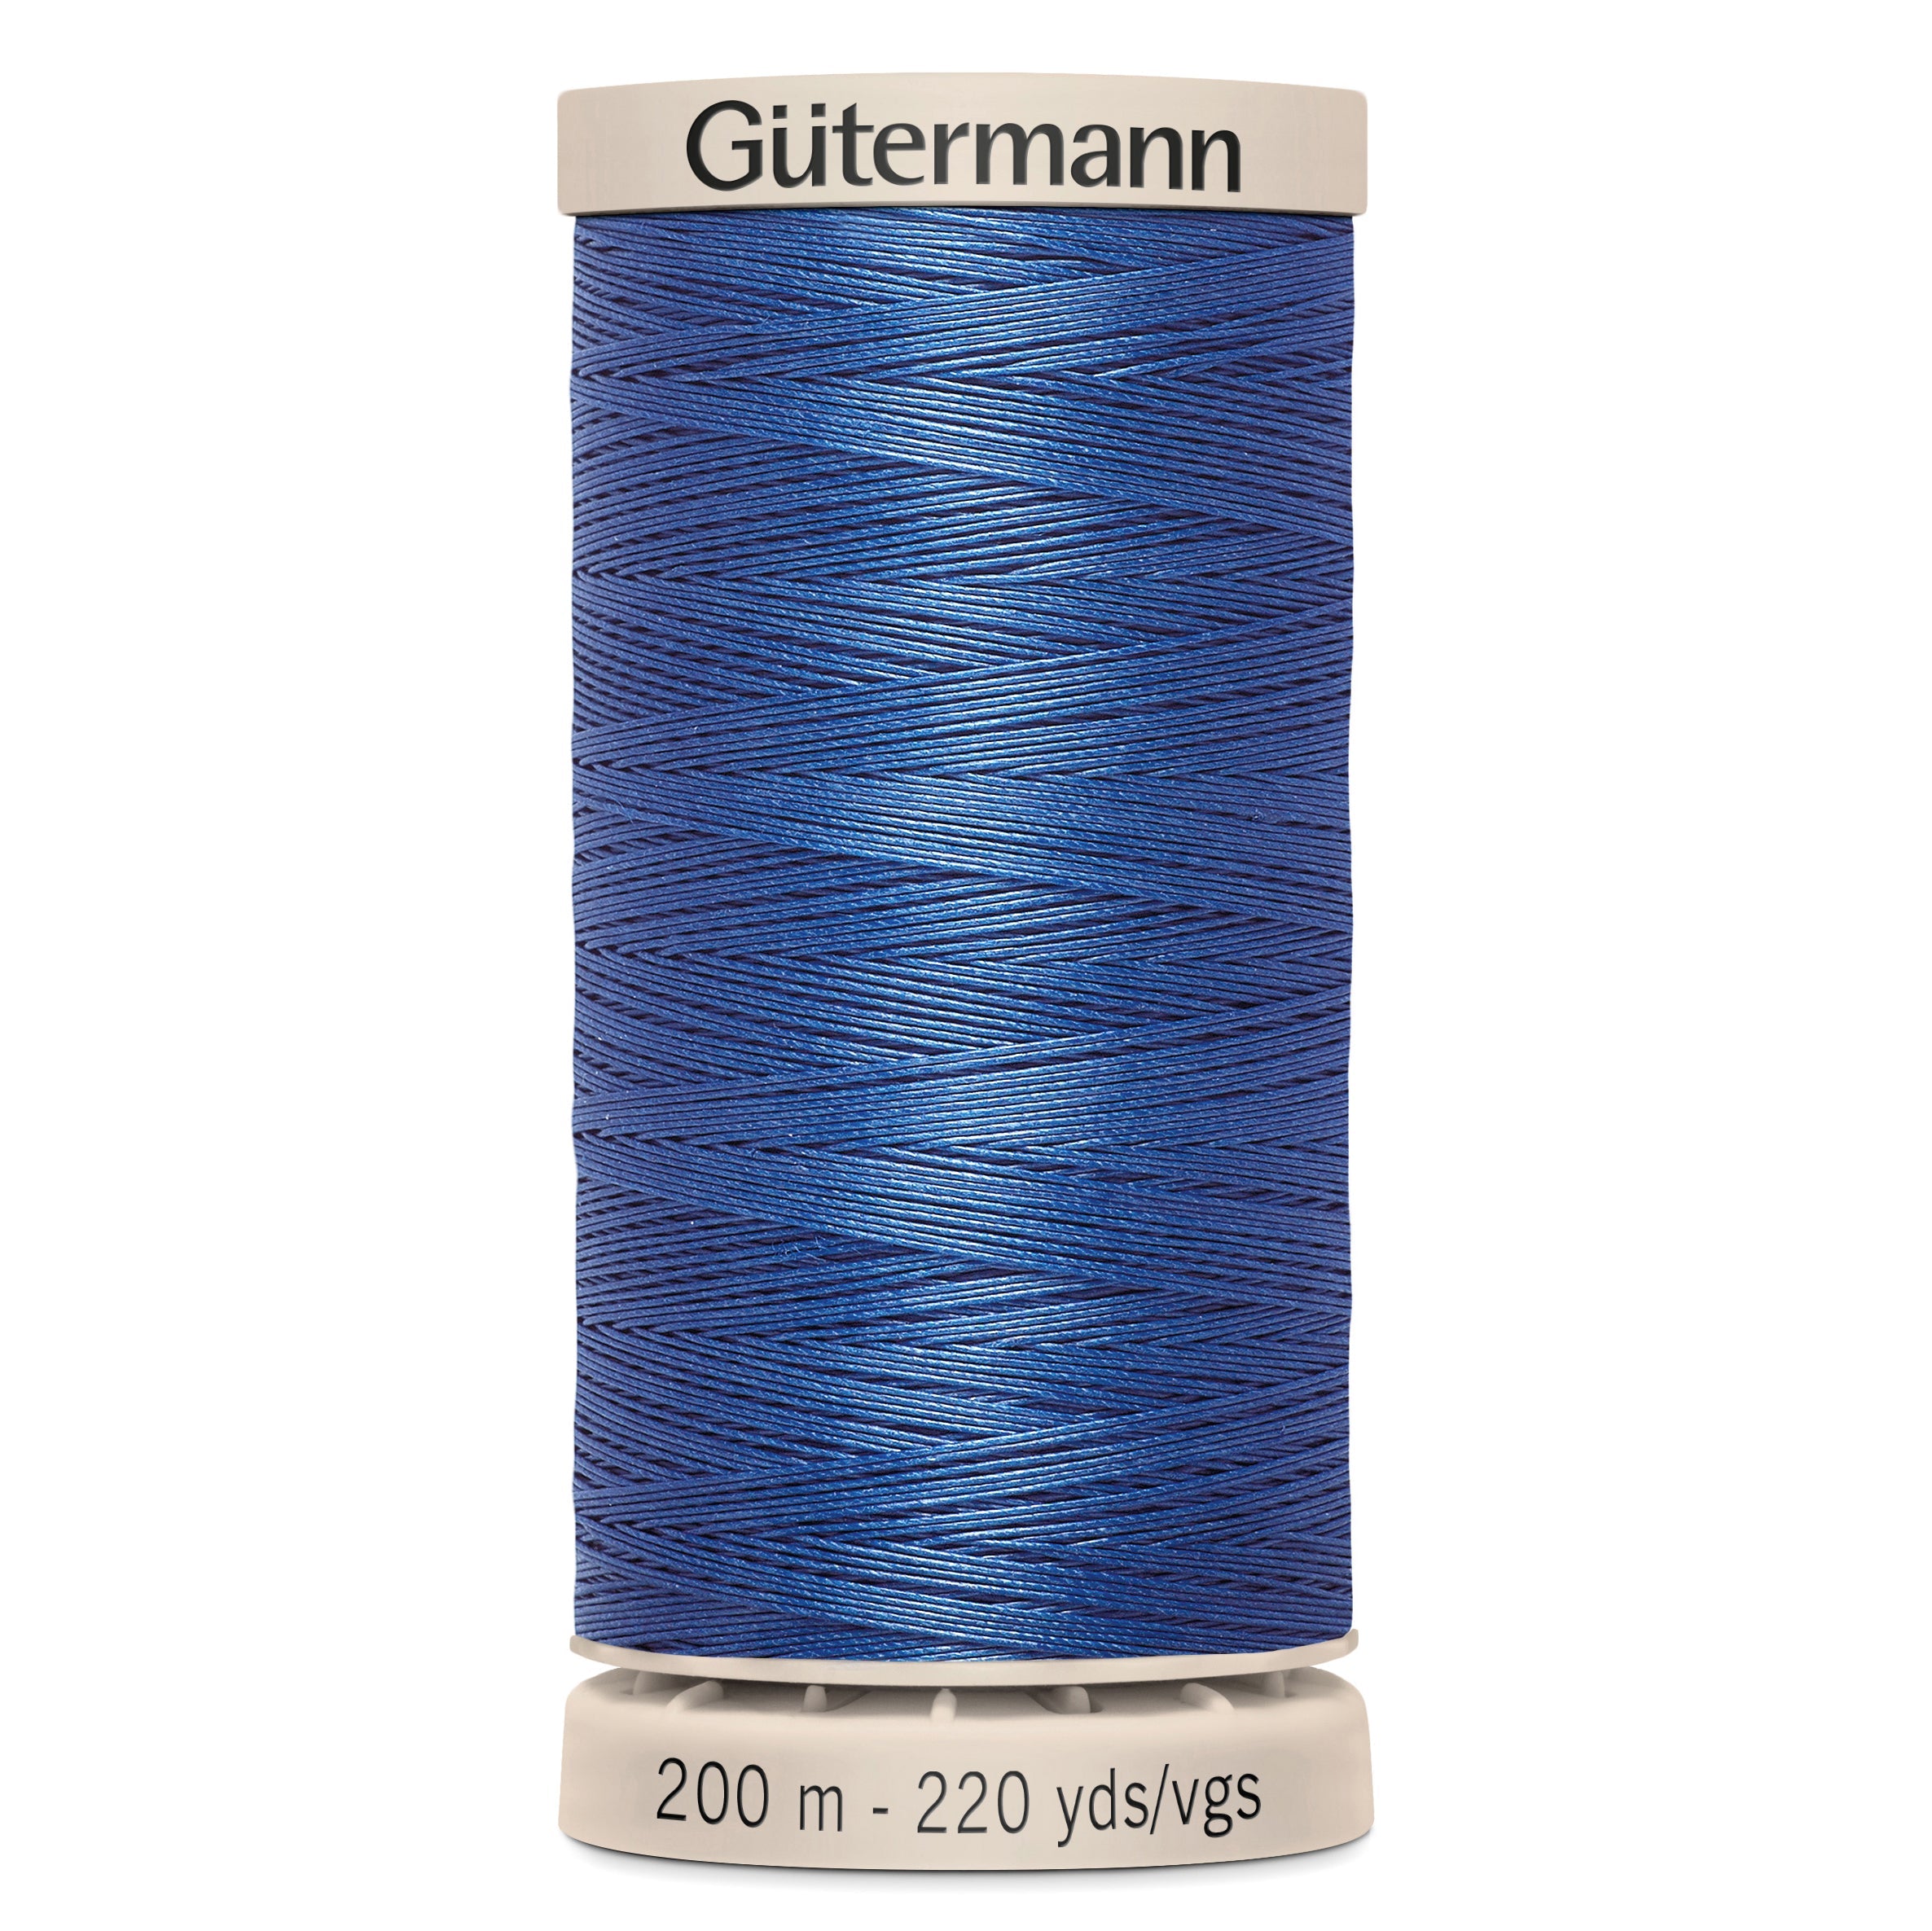 Gutermann Hand Quilting Cotton - 5133 from Jaycotts Sewing Supplies